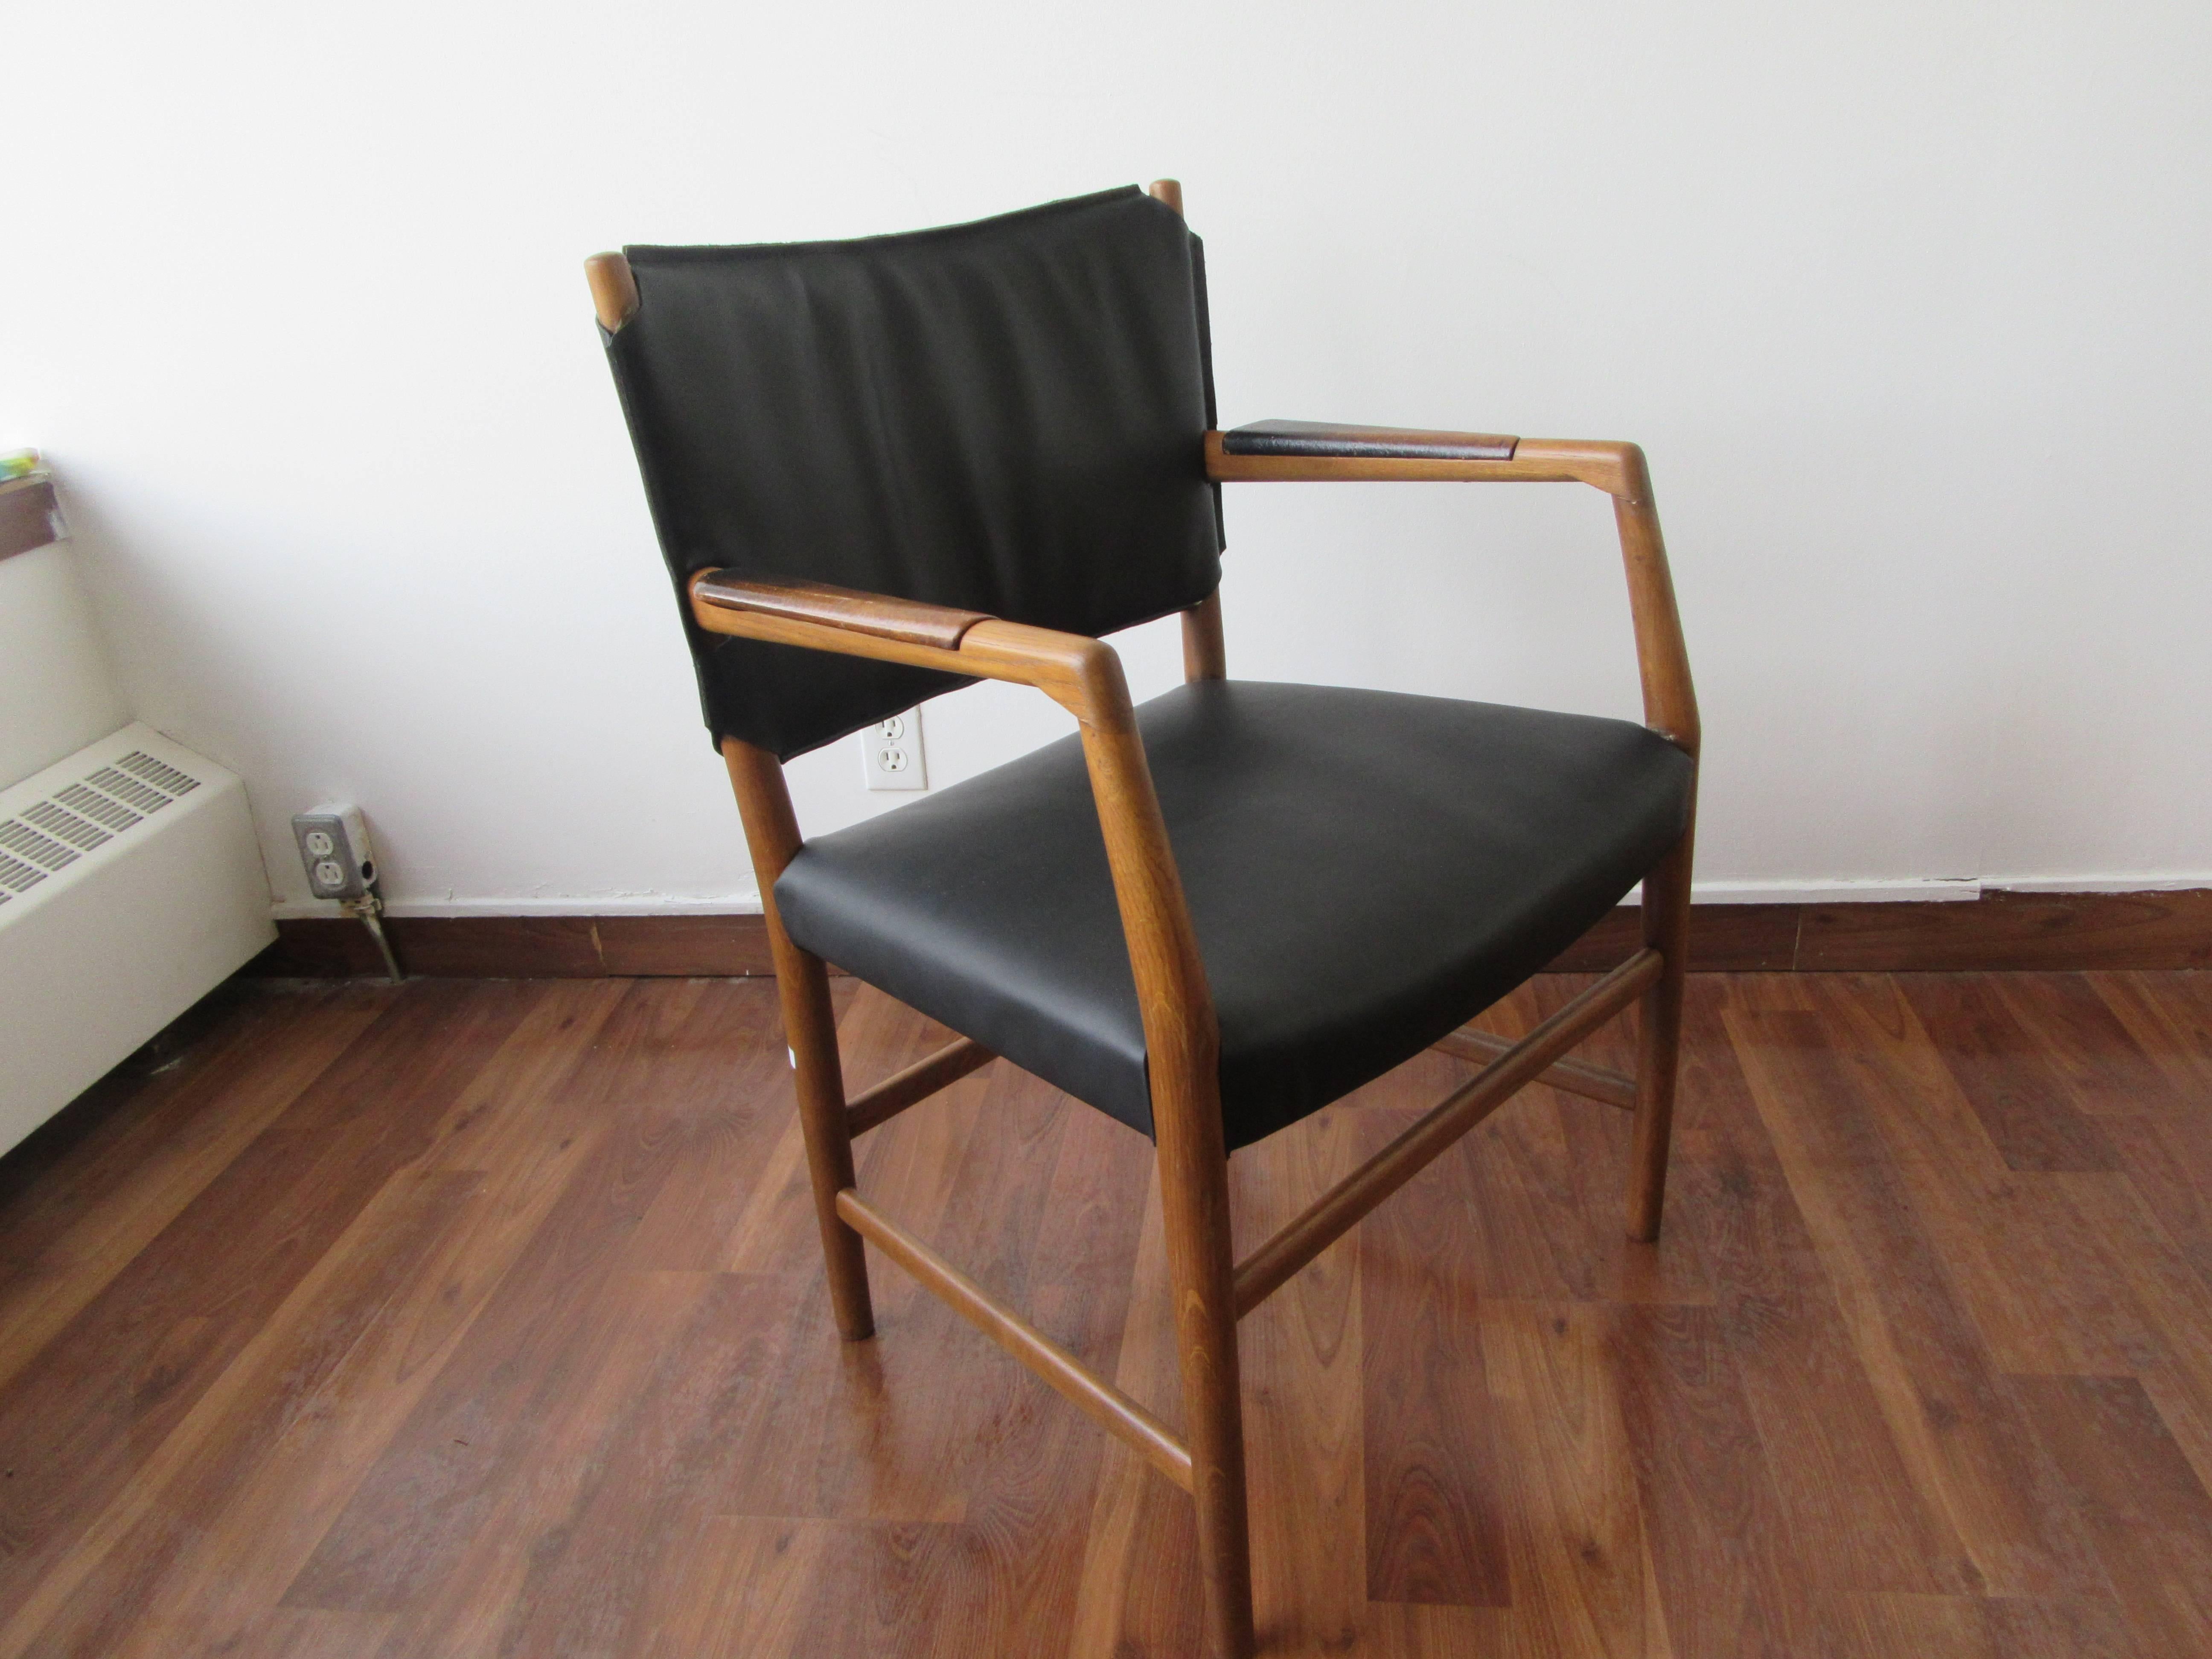 The Aarhus City Hall chair in oak and new black leather was designed by Hans Wegner for Plan Mobler in the 1940s specifically for Aarhus City Hall.